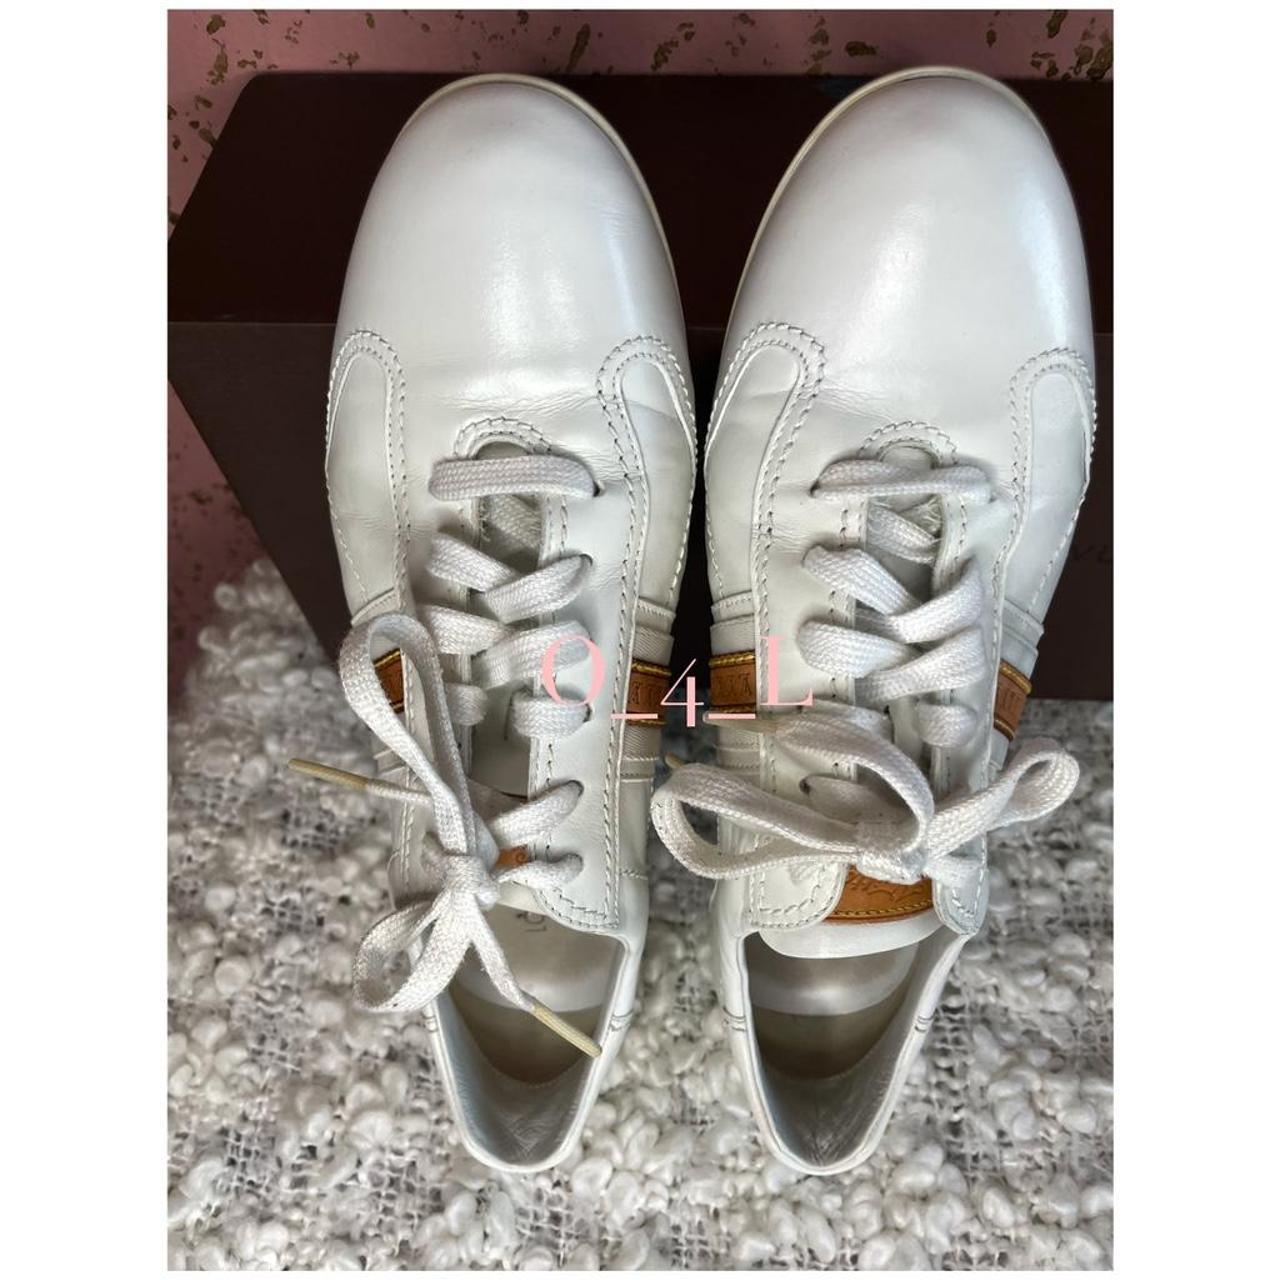 Louis Vuitton White Leather Athletic Shoes for Women